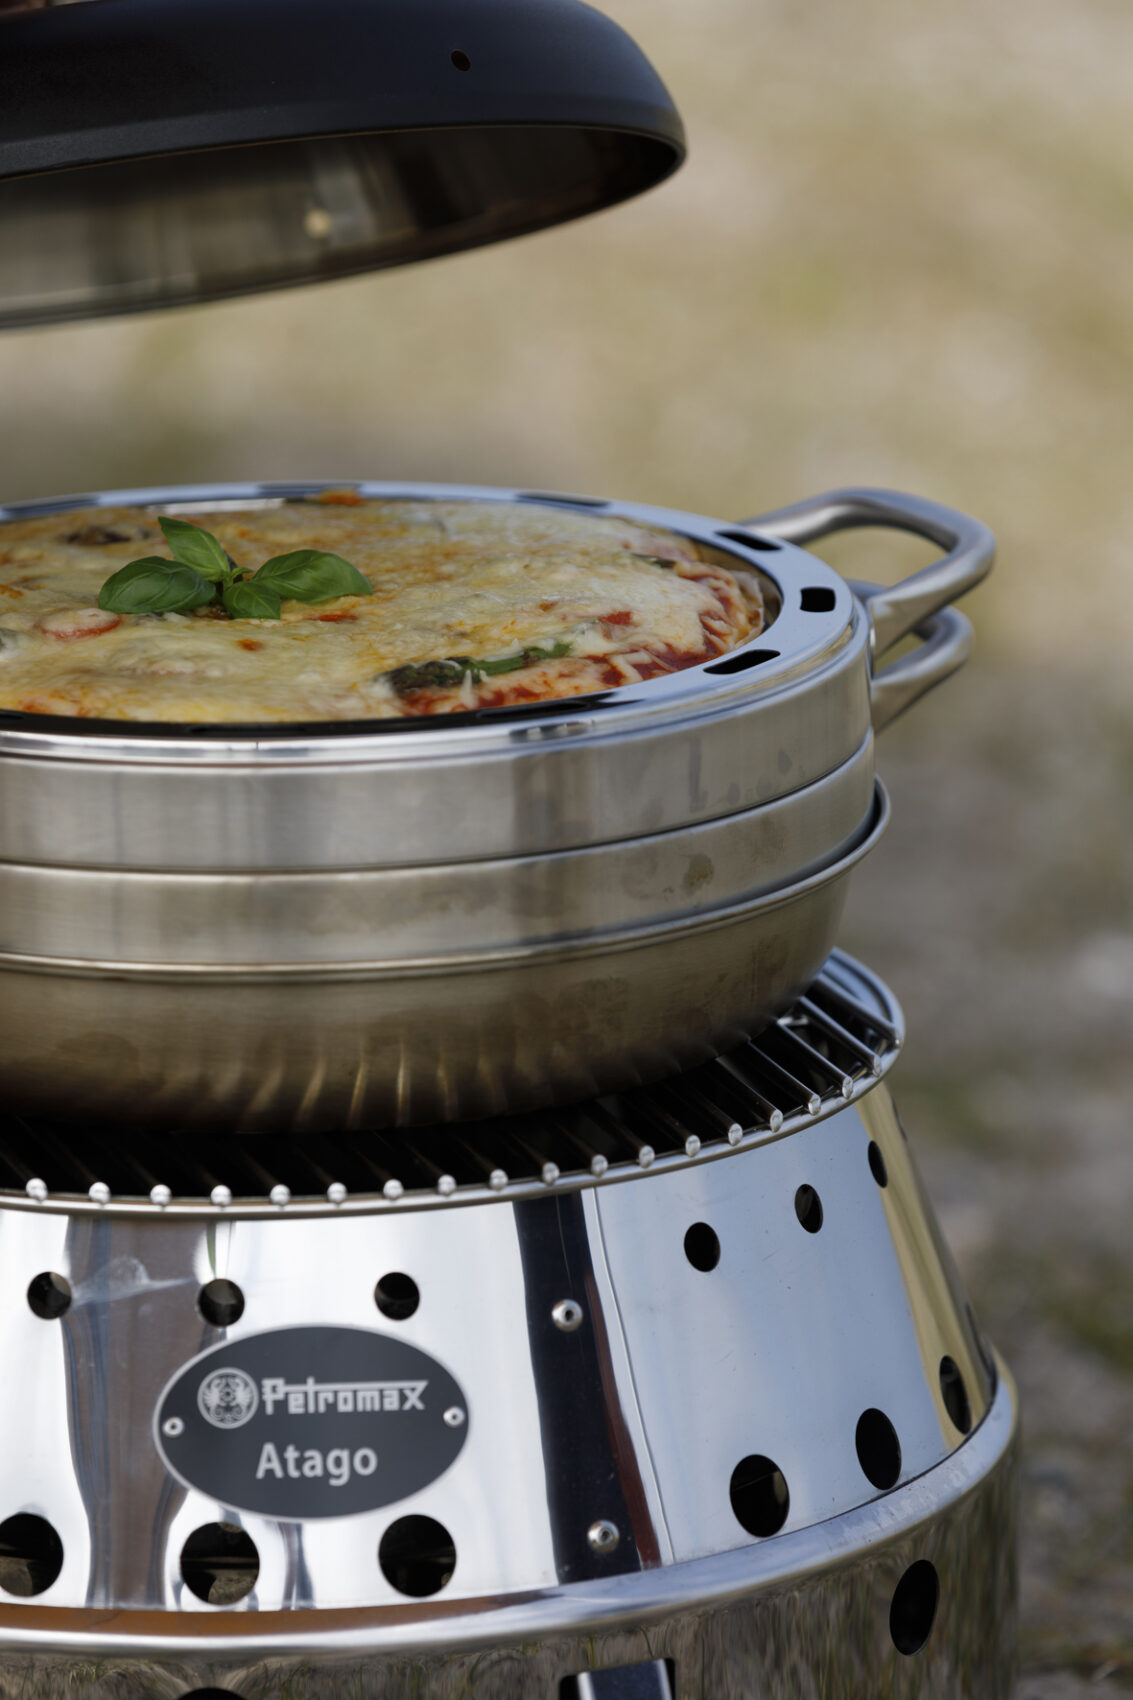 https://www.campingwithstyle.co.uk/wp-content/uploads/2023/04/Petromax-Baking-Tray-and-Camping-Oven-on-Atago-Stove-scaled.jpg